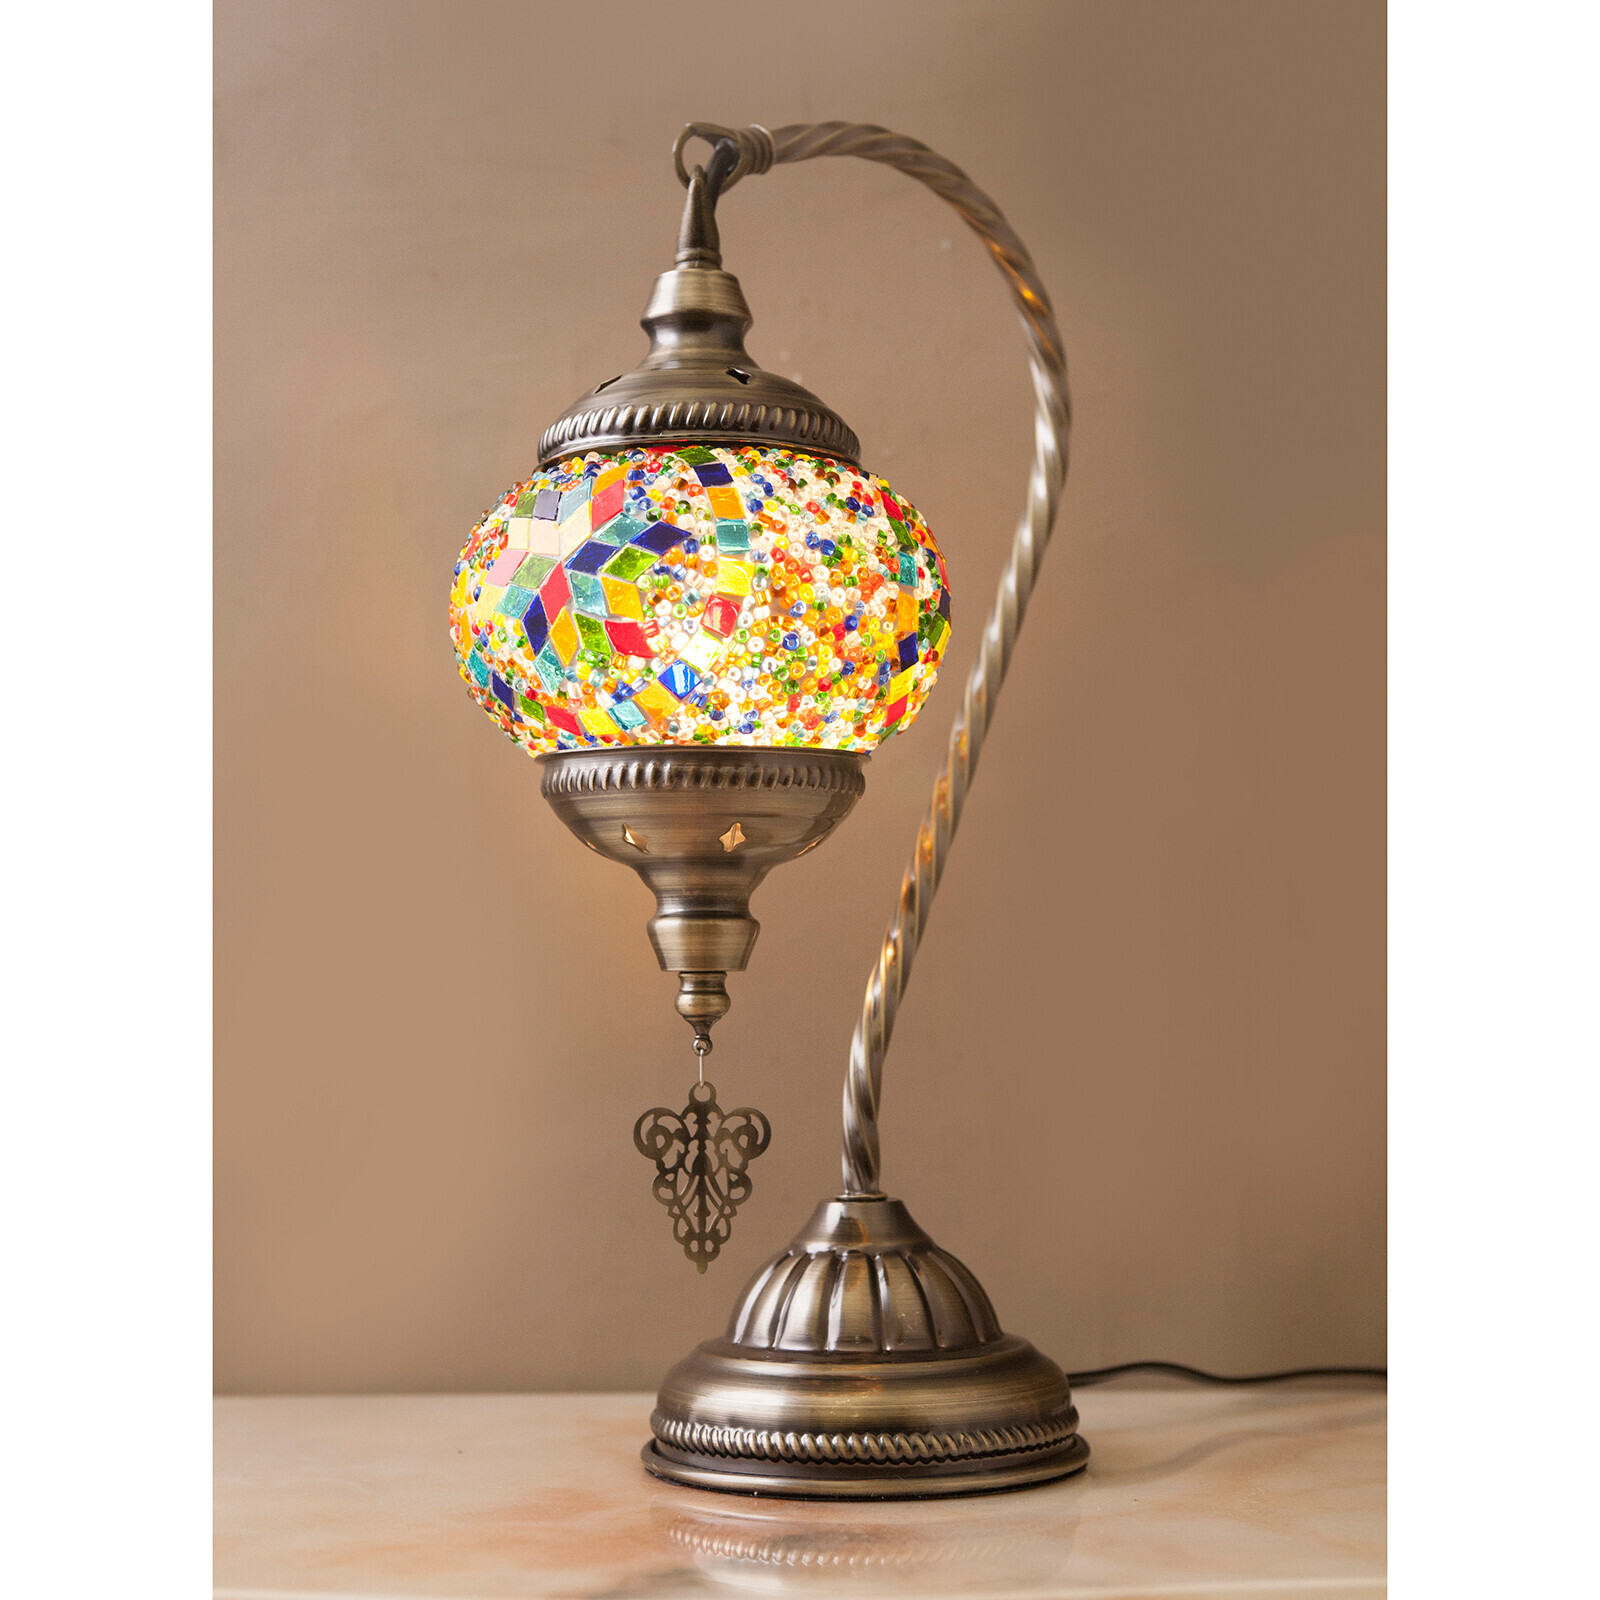 Mosaic Lamp Table Led Attached, Table Lamp With Table Attached